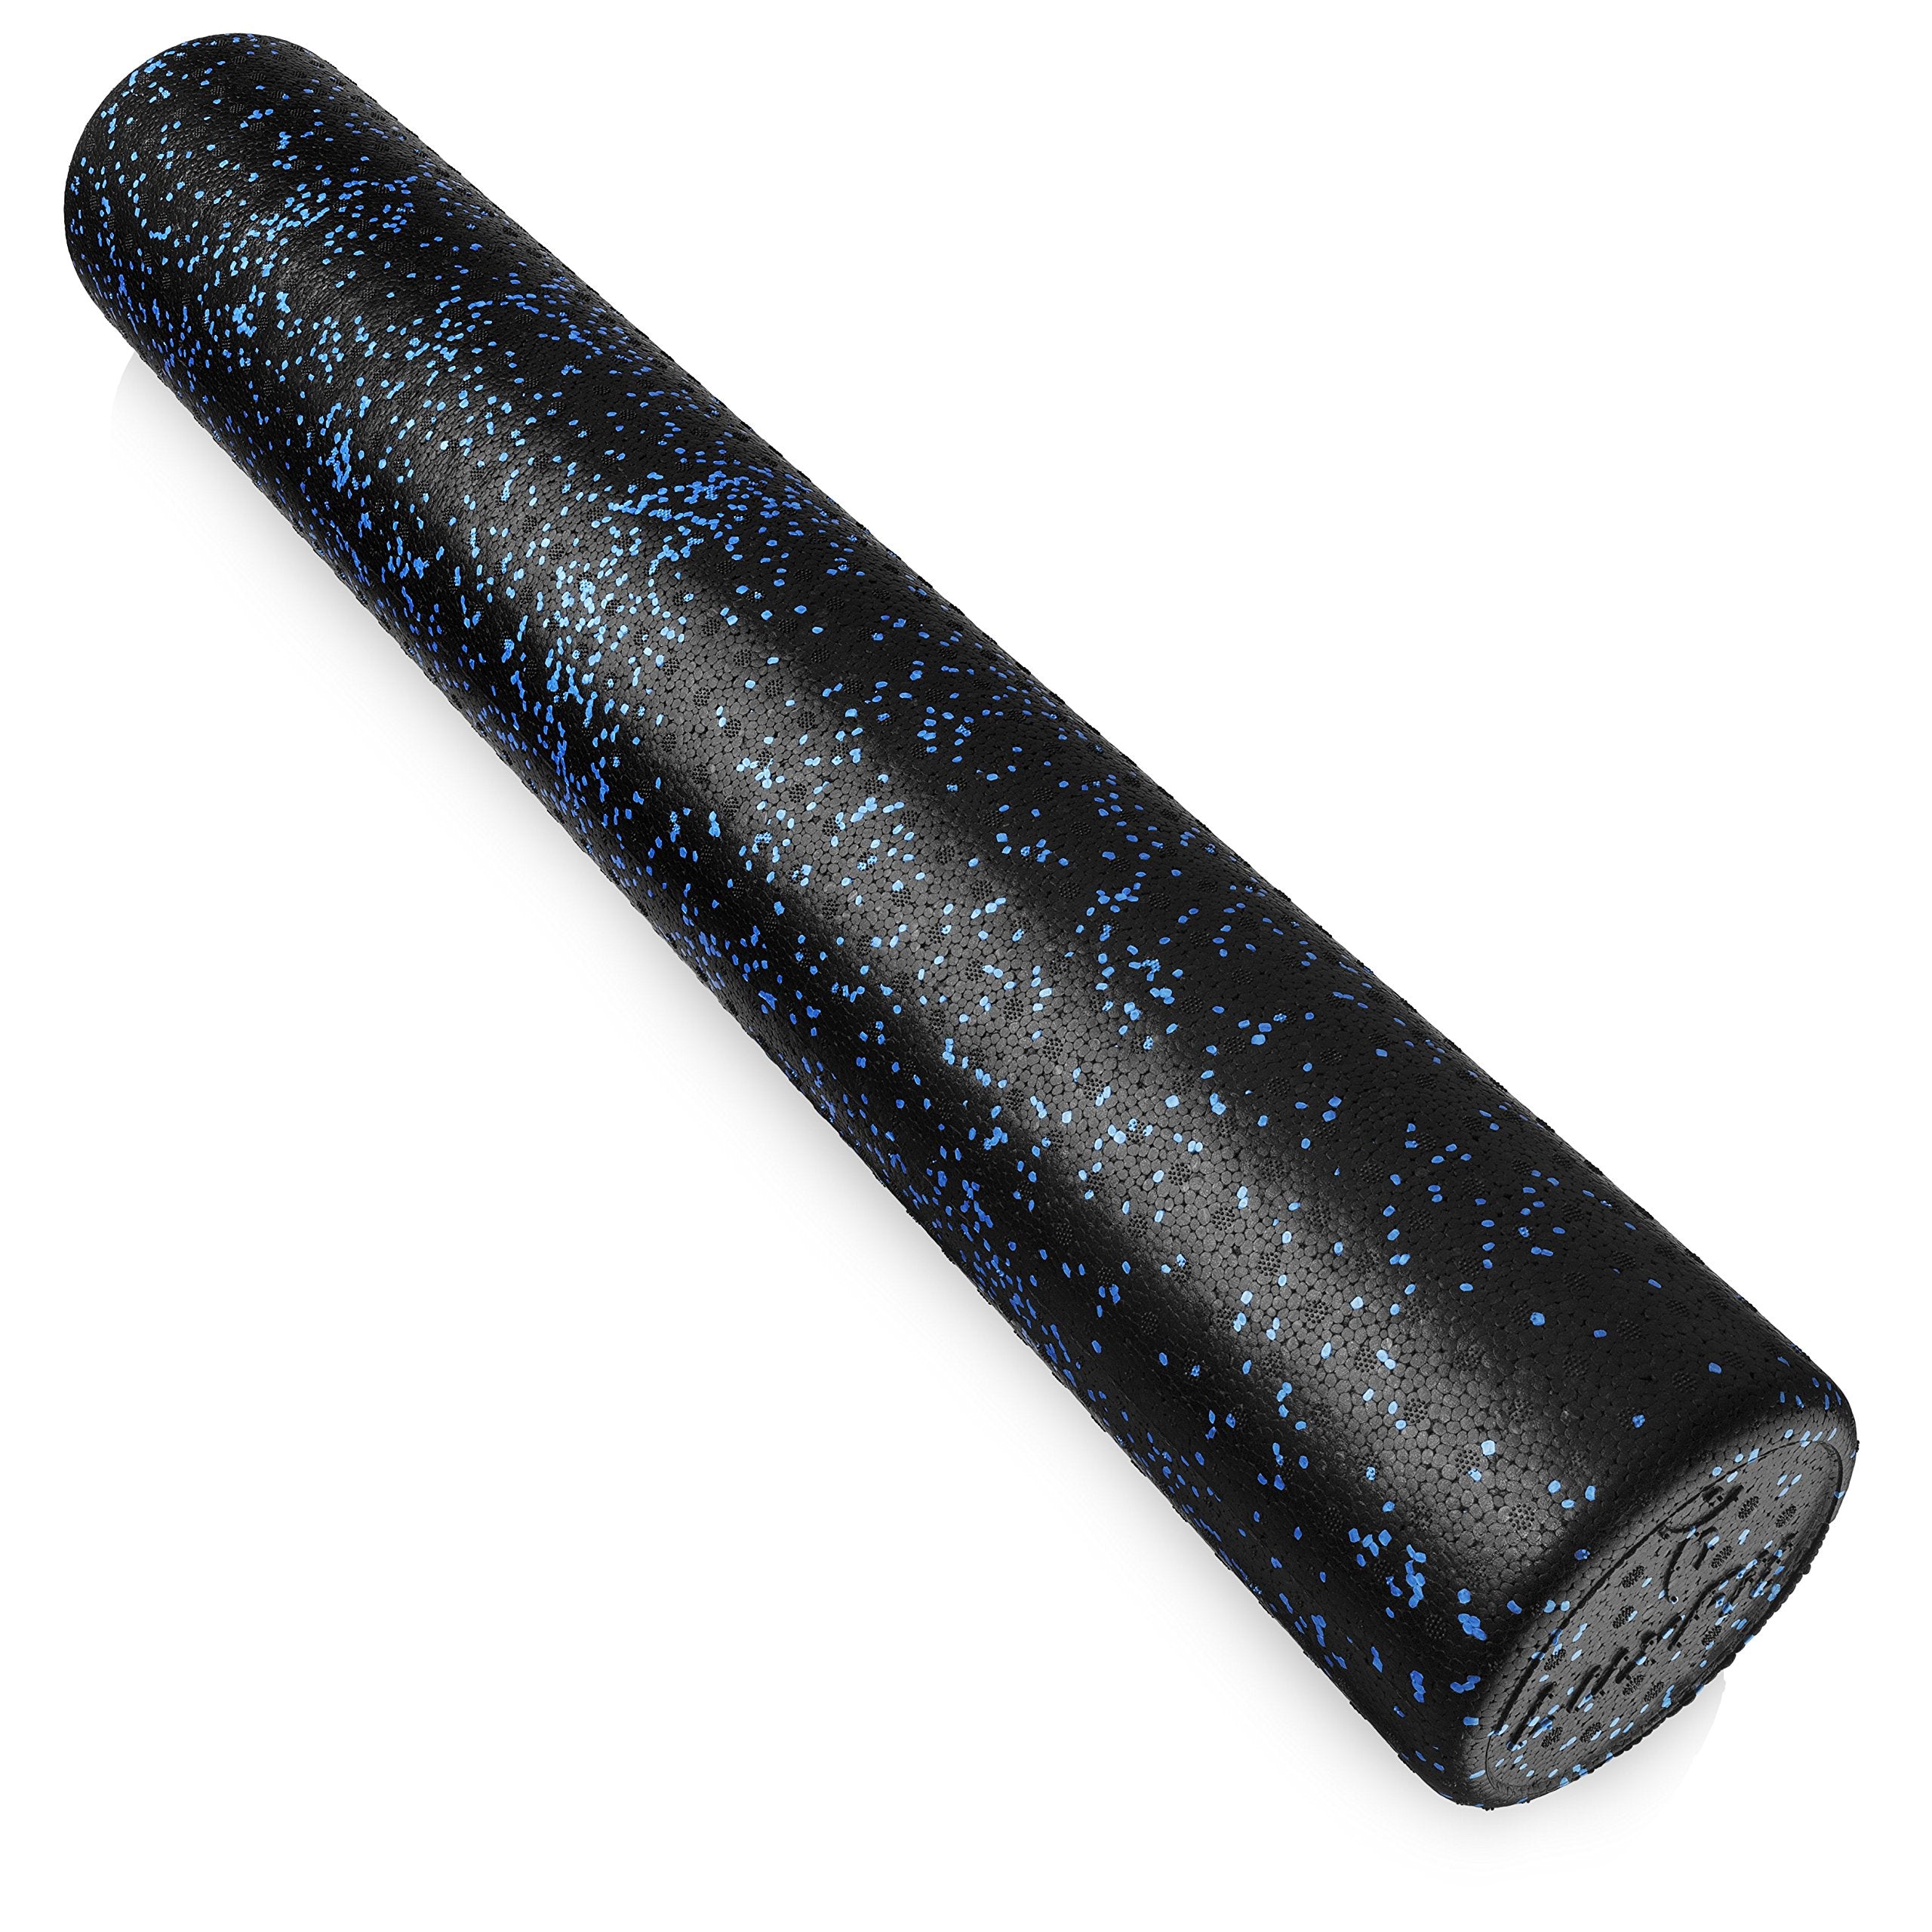 LuxFit Extra Firm Speckled Foam Roller with Online Instructional Video (Blue, 18-Inch)